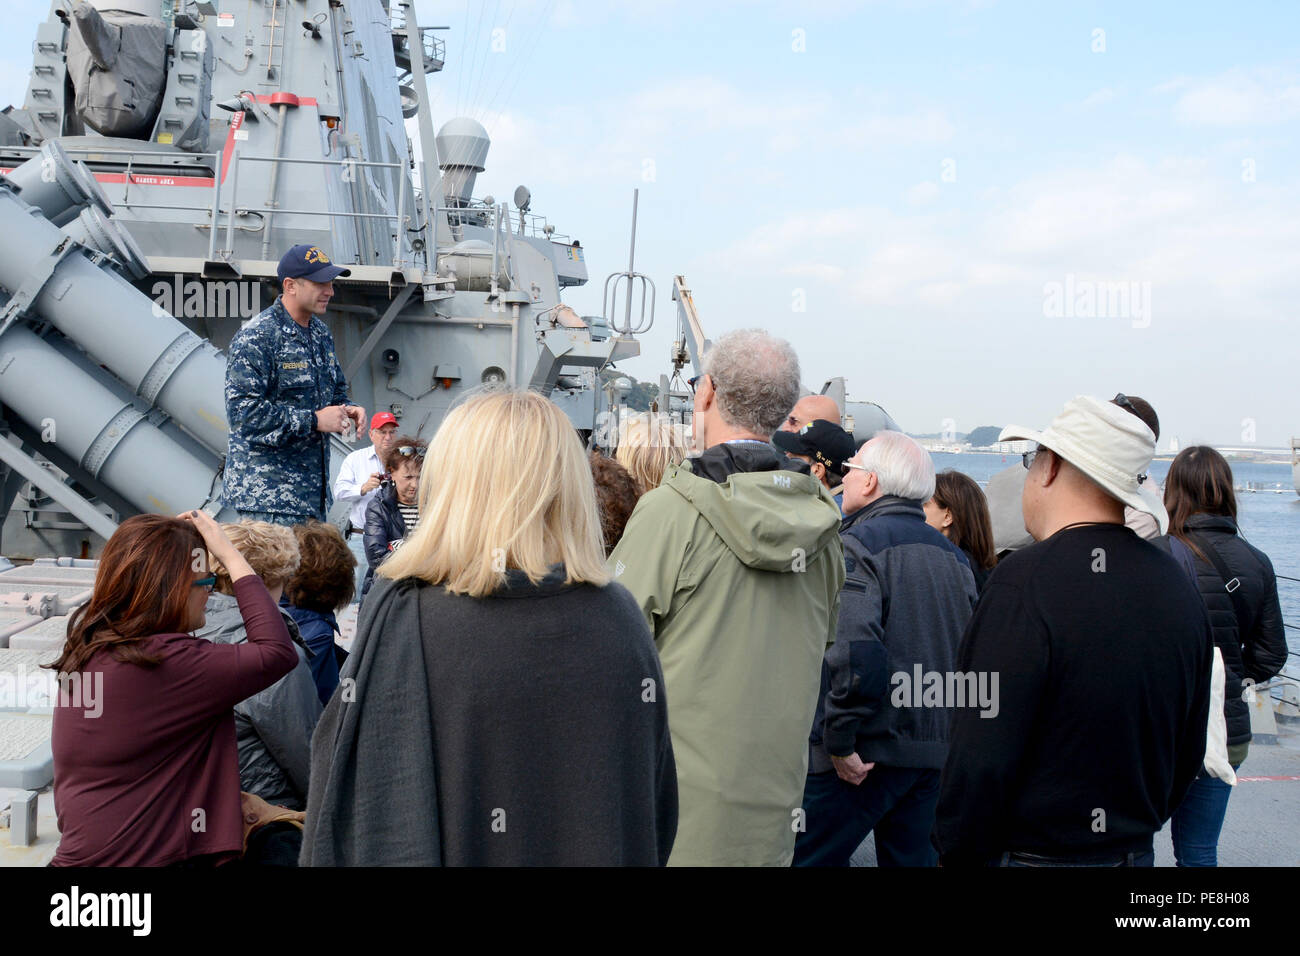 151029-N-XN177-084 YOKOSUKA, Japan (October 29, 2015) – Lt. Jonathan Greenwald, Weapons Officer of the Arleigh Burke-class guided-missile destroyer USS Benfold (DDG 65)  speaks to members of the American Israel Public Affairs Committee about ship operations during a ship tour.  Benfold is moored pier-side at Fleet Activities (FLEACT) Yokosuka. FLEACT provides, maintains, and operates base facilities and services in support of 7th Fleet’s forward-deployed naval forces, 83 tenant commands, and 24,000 military and civilian personnel. (U.S. Navy photo by Mass Communication Specialist 2nd Class Pet Stock Photo